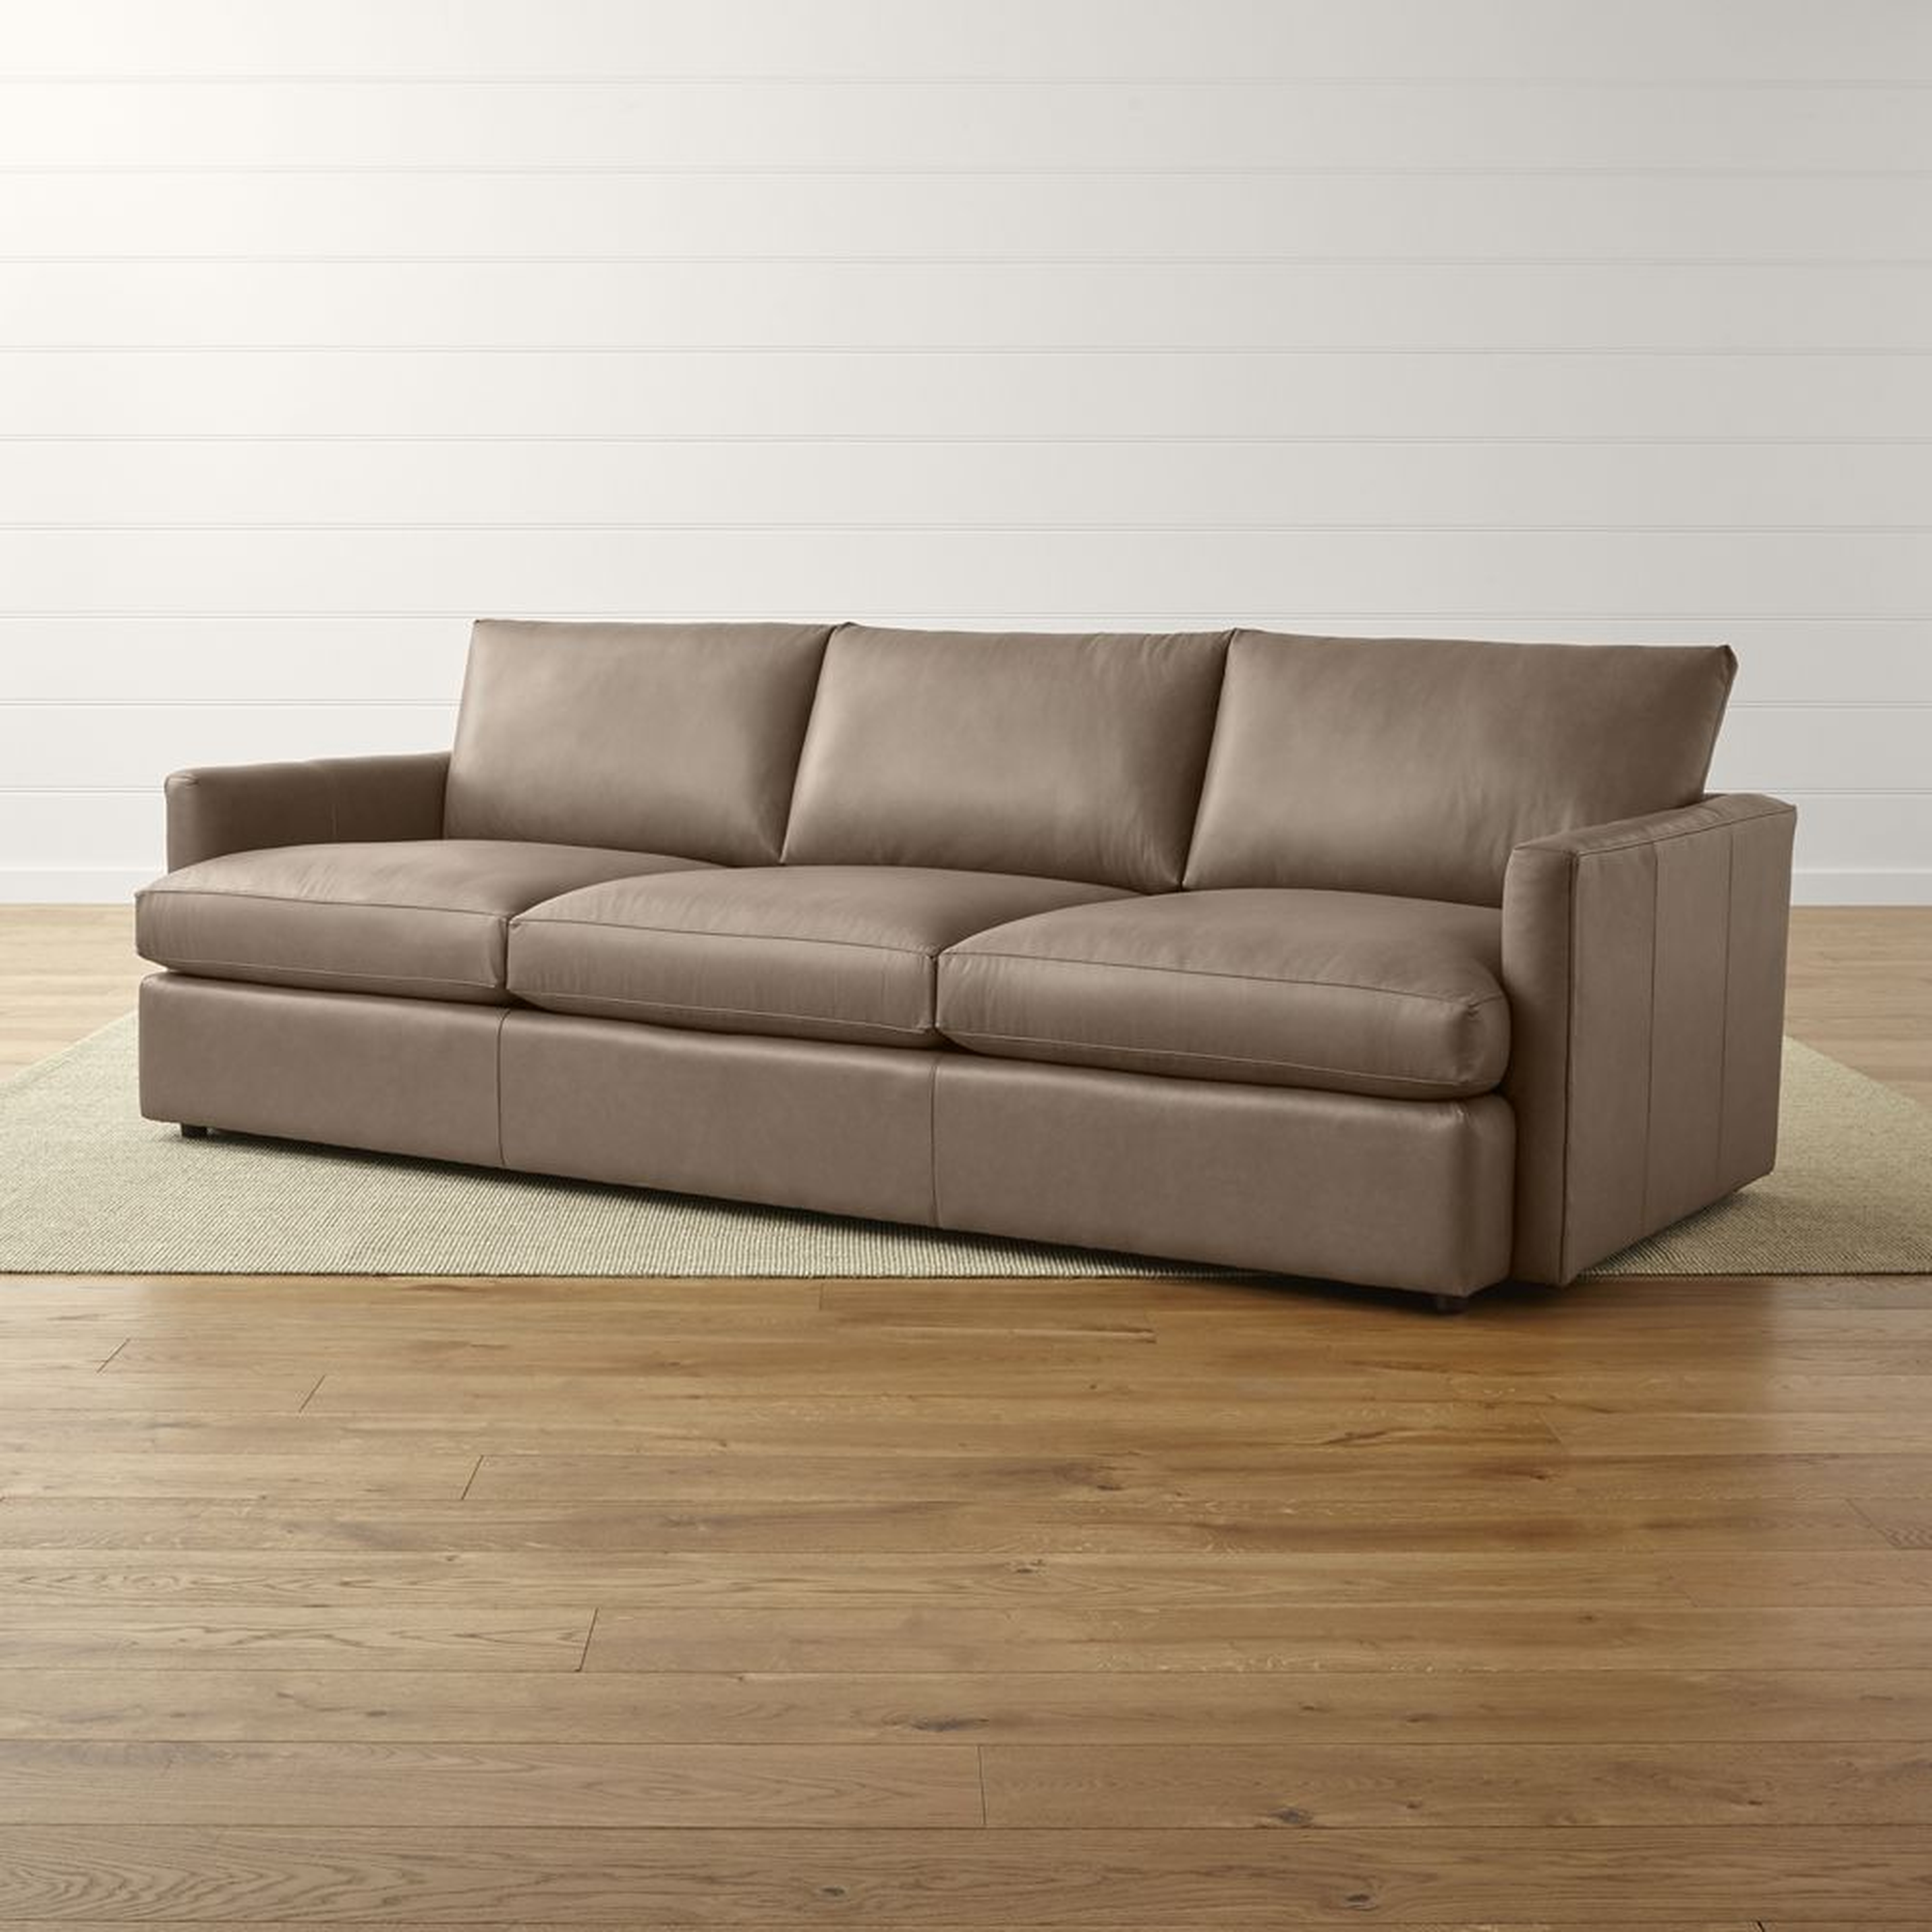 Lounge Leather 3-Seat Grande Sofa 105" - Crate and Barrel